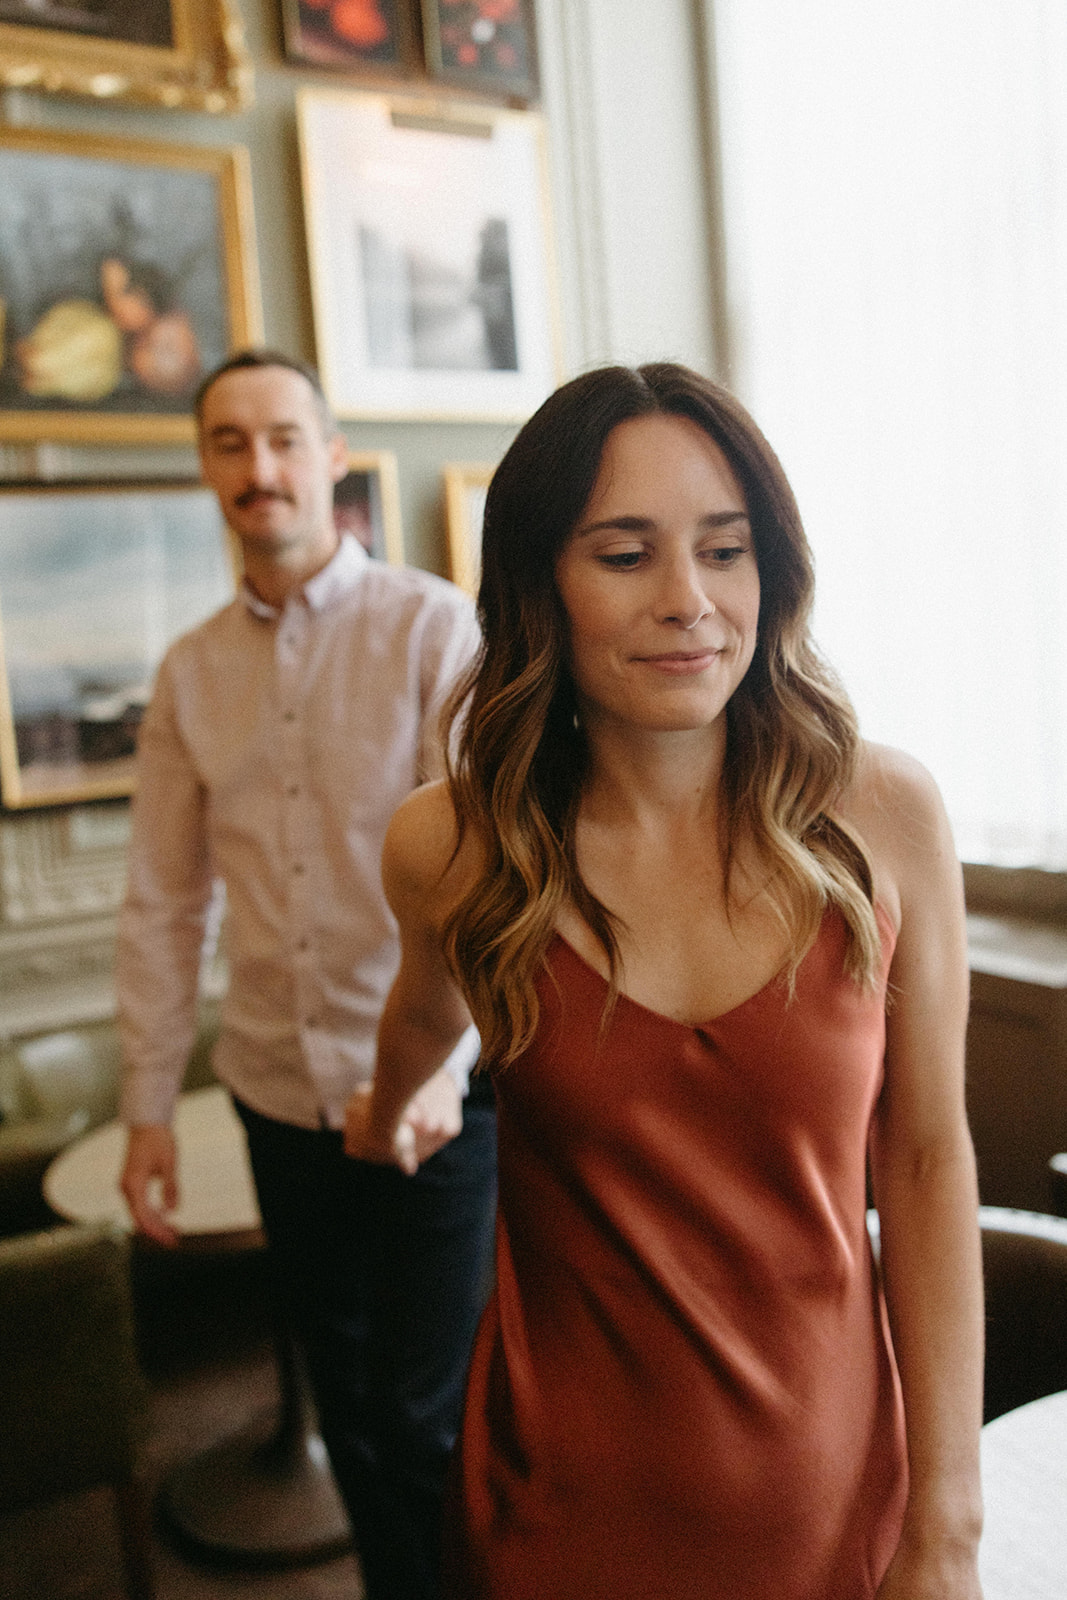 A woman leads her fiancé through Berner’s Tavern in London, which is decorated with vintage artwork in golden frame. 